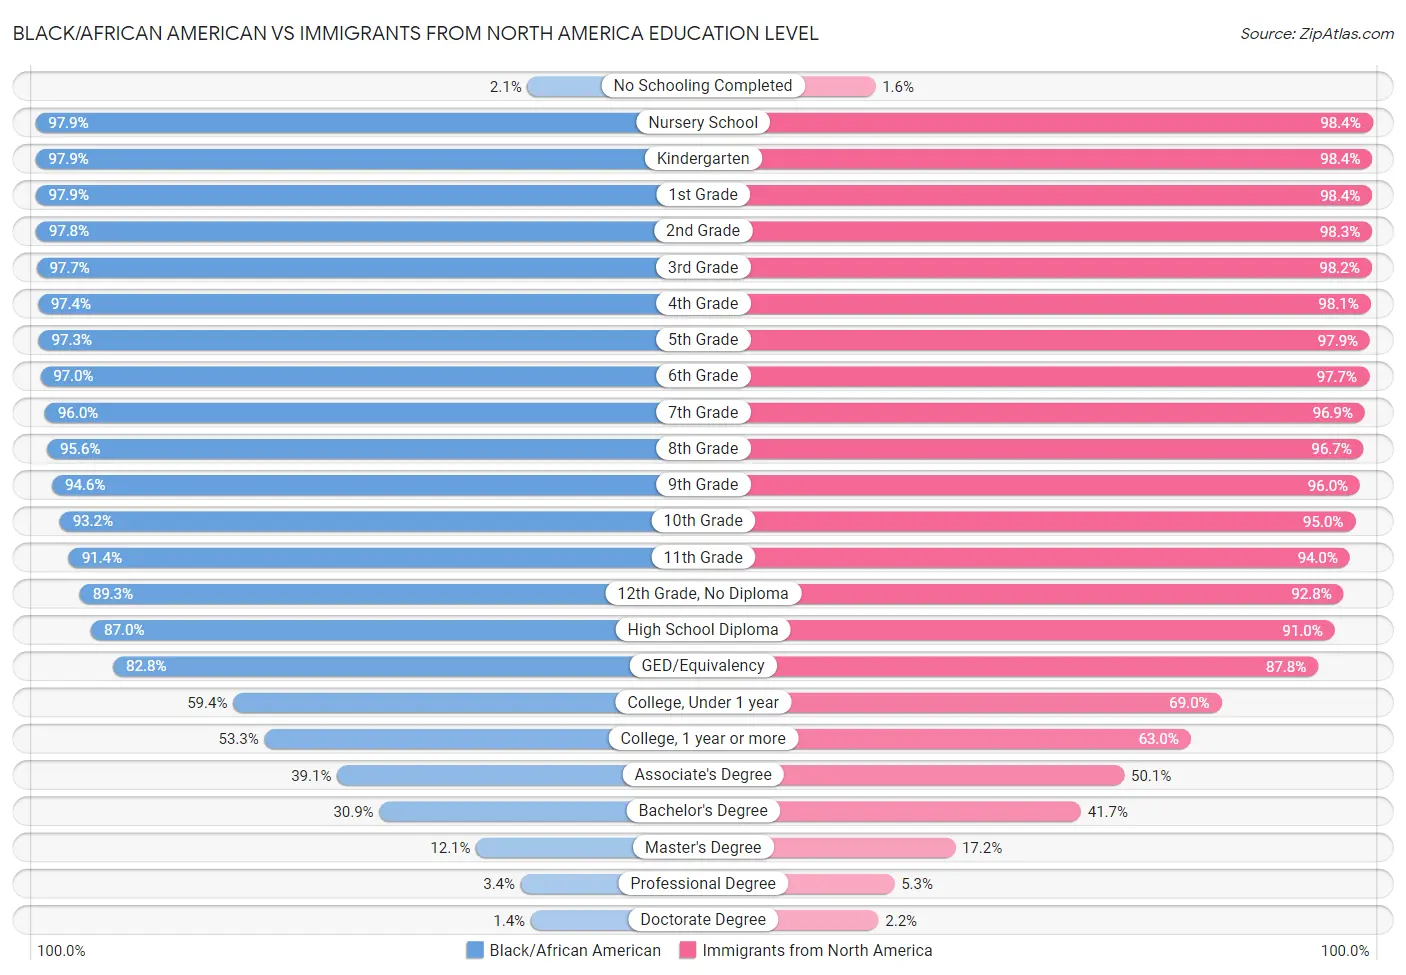 Black/African American vs Immigrants from North America Education Level